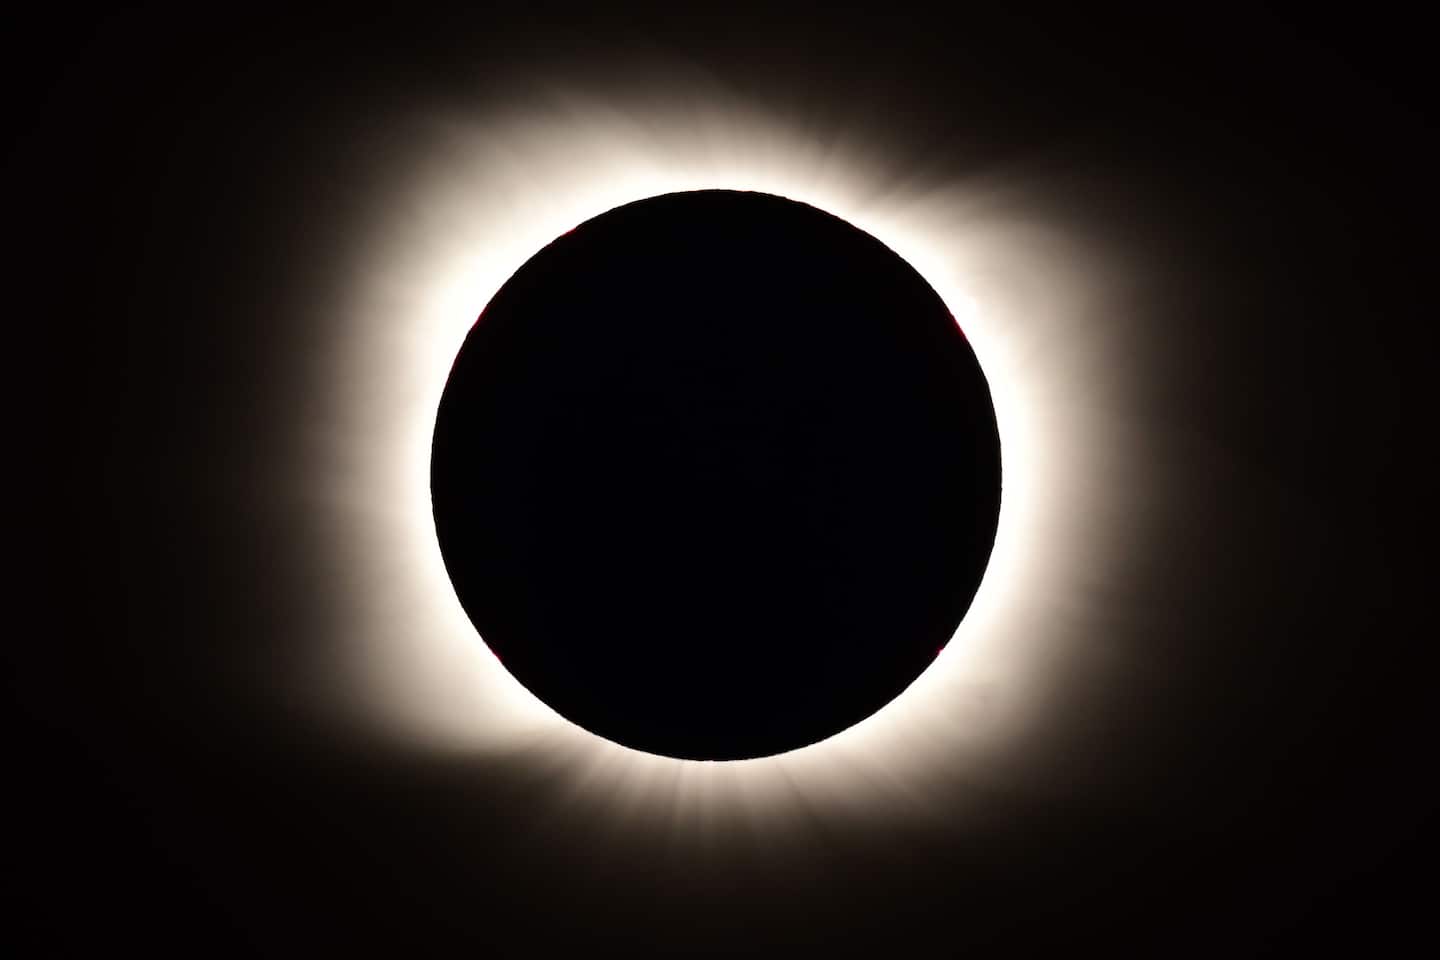 The total solar eclipse will dazzle over Chile, Argentina on Monday